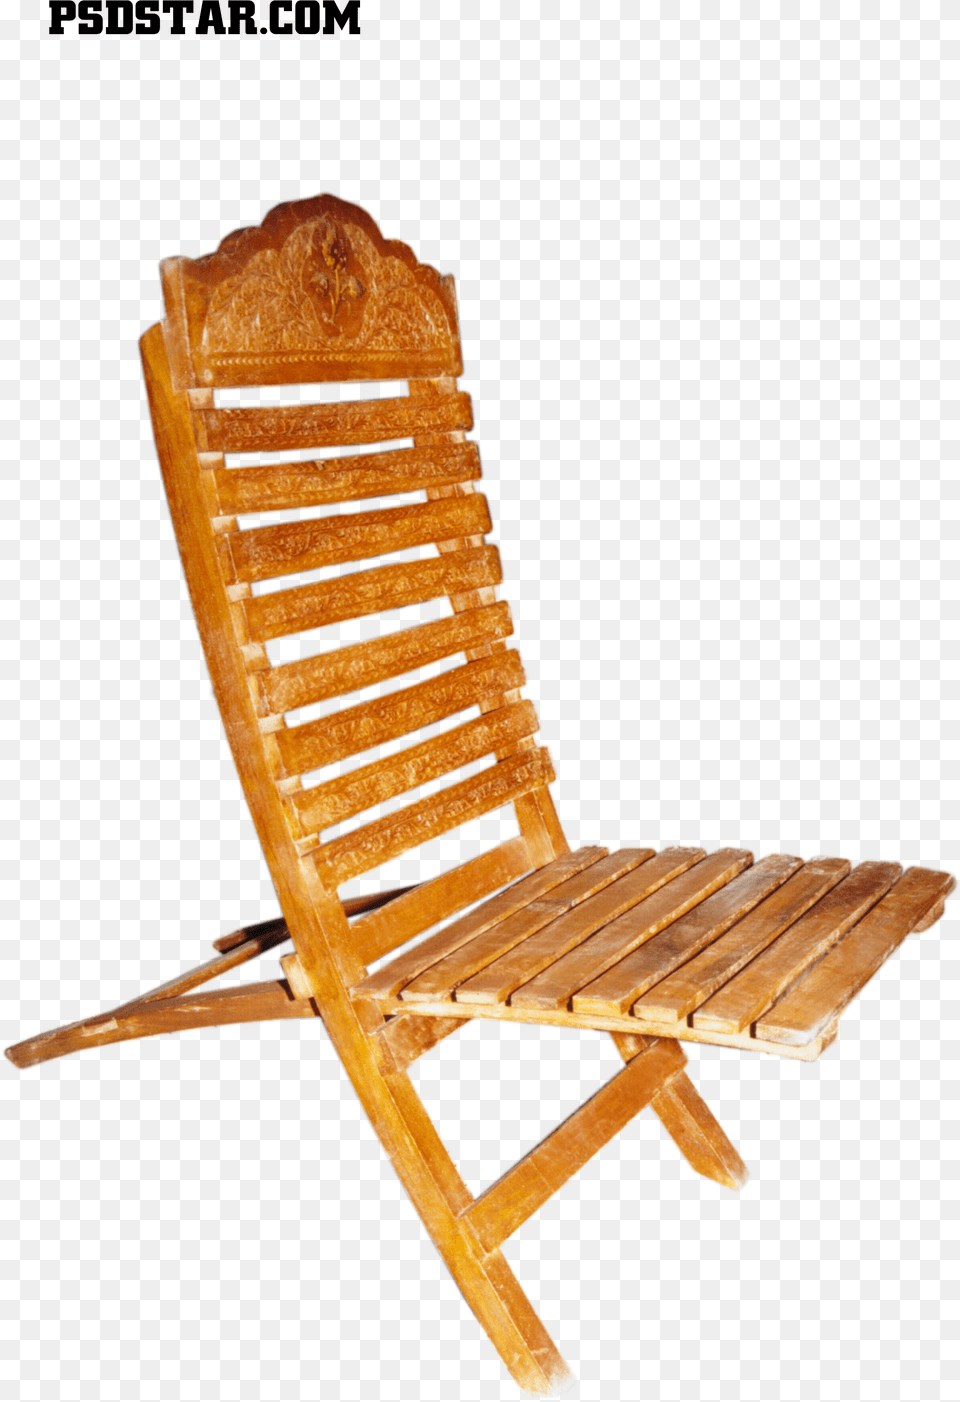 Folding Chair Hd Images For Photoshop Free Png Download